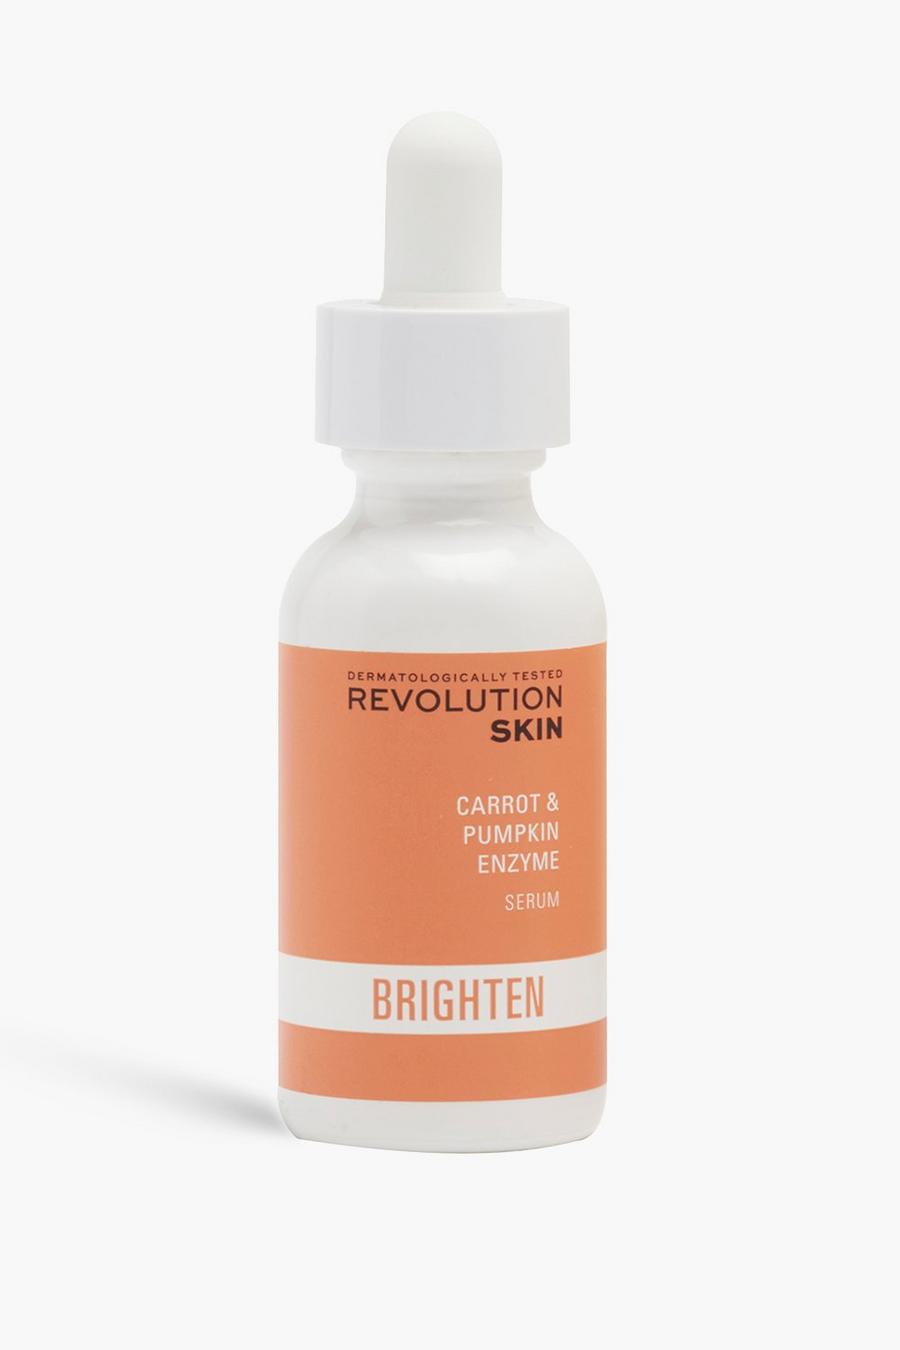 Clear Revolution Skincare Carrot, Cucumber Extract And Pumpkin Enzyme Serum